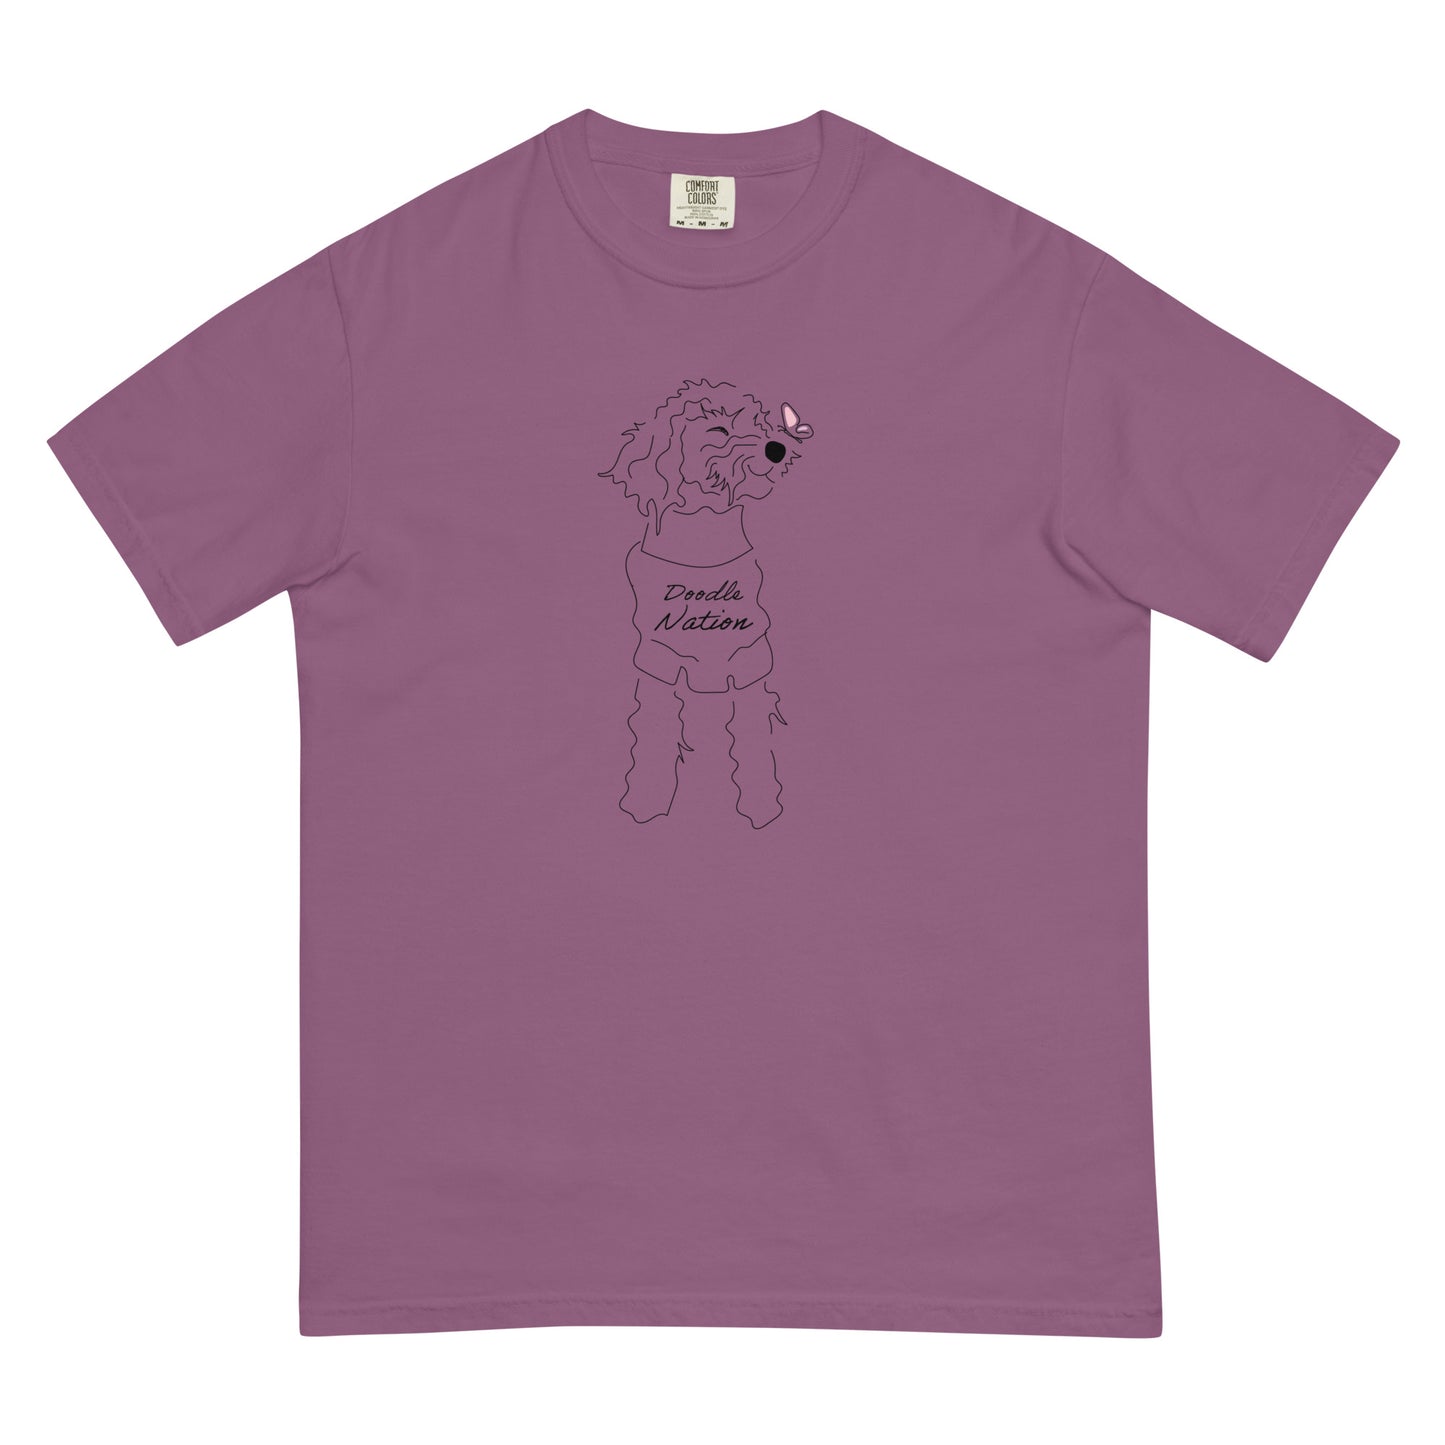 Goldendoodle comfort colors t-shirt with Goldendoodle dog and words "Doodle Nation" in berry color